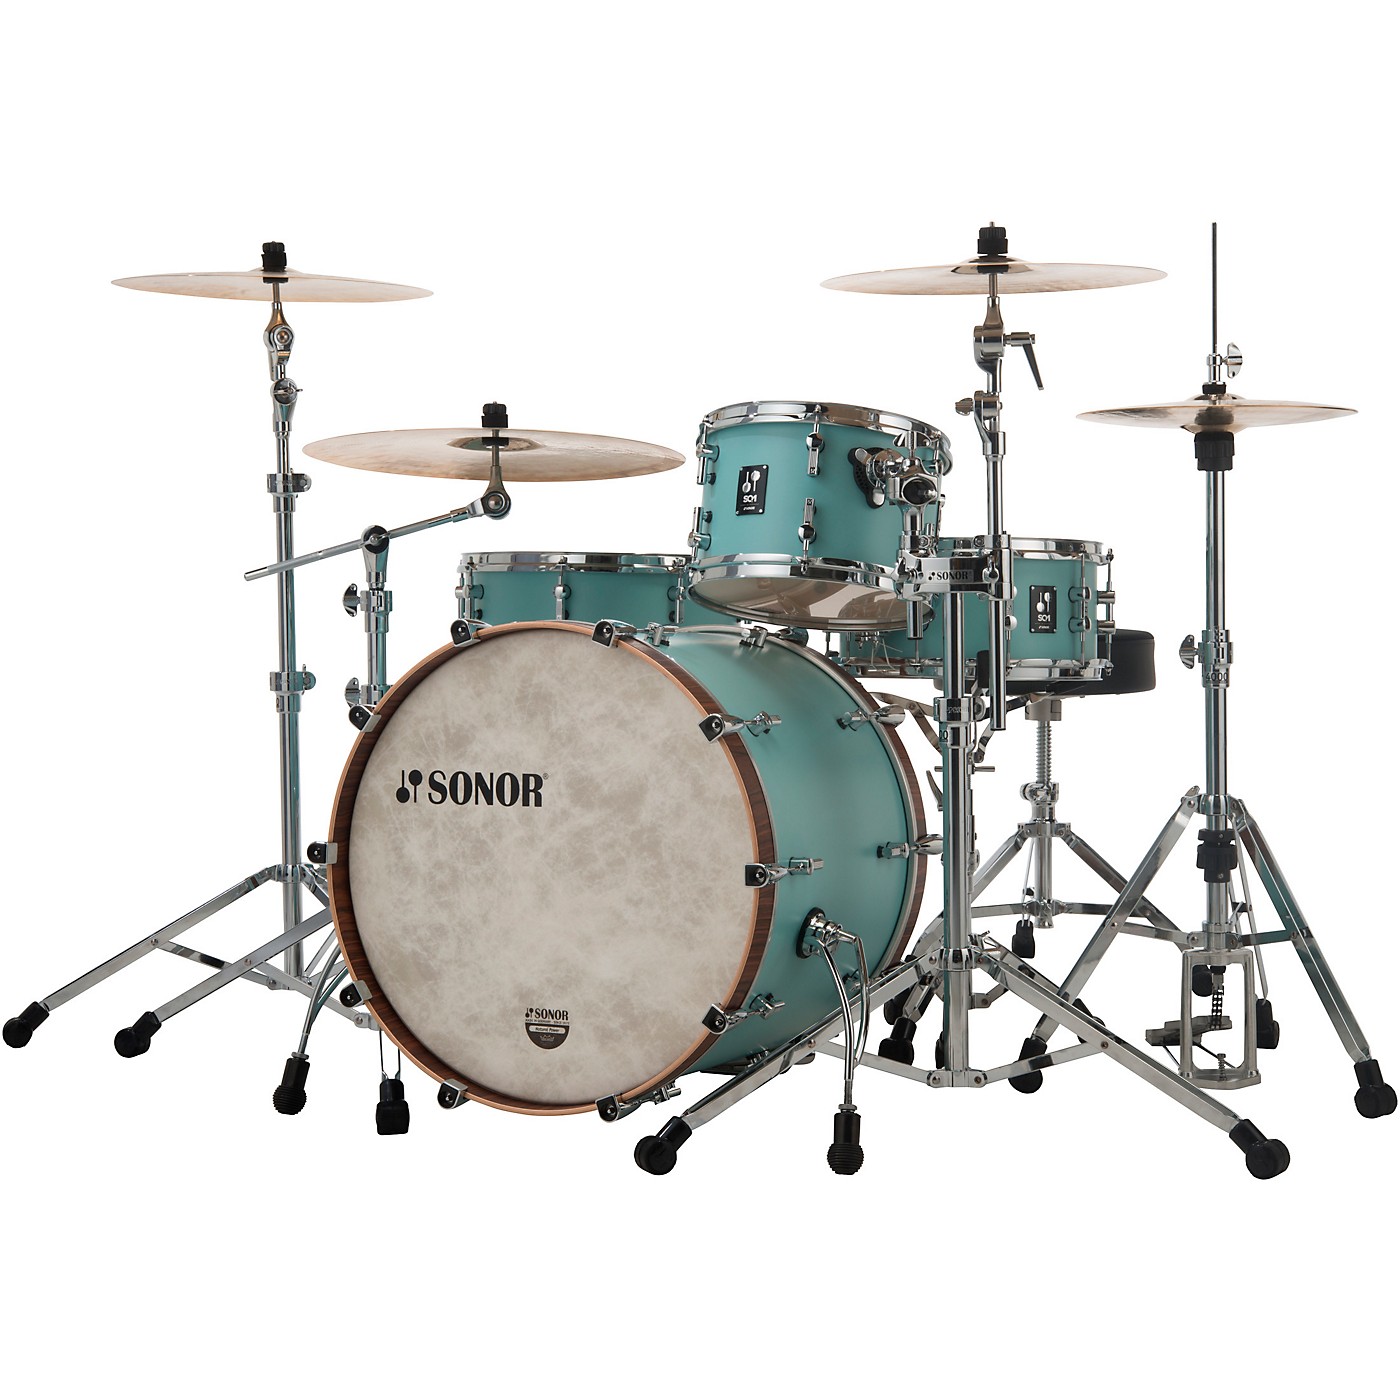 SONOR SQ1 3-Piece Shell Pack With 24